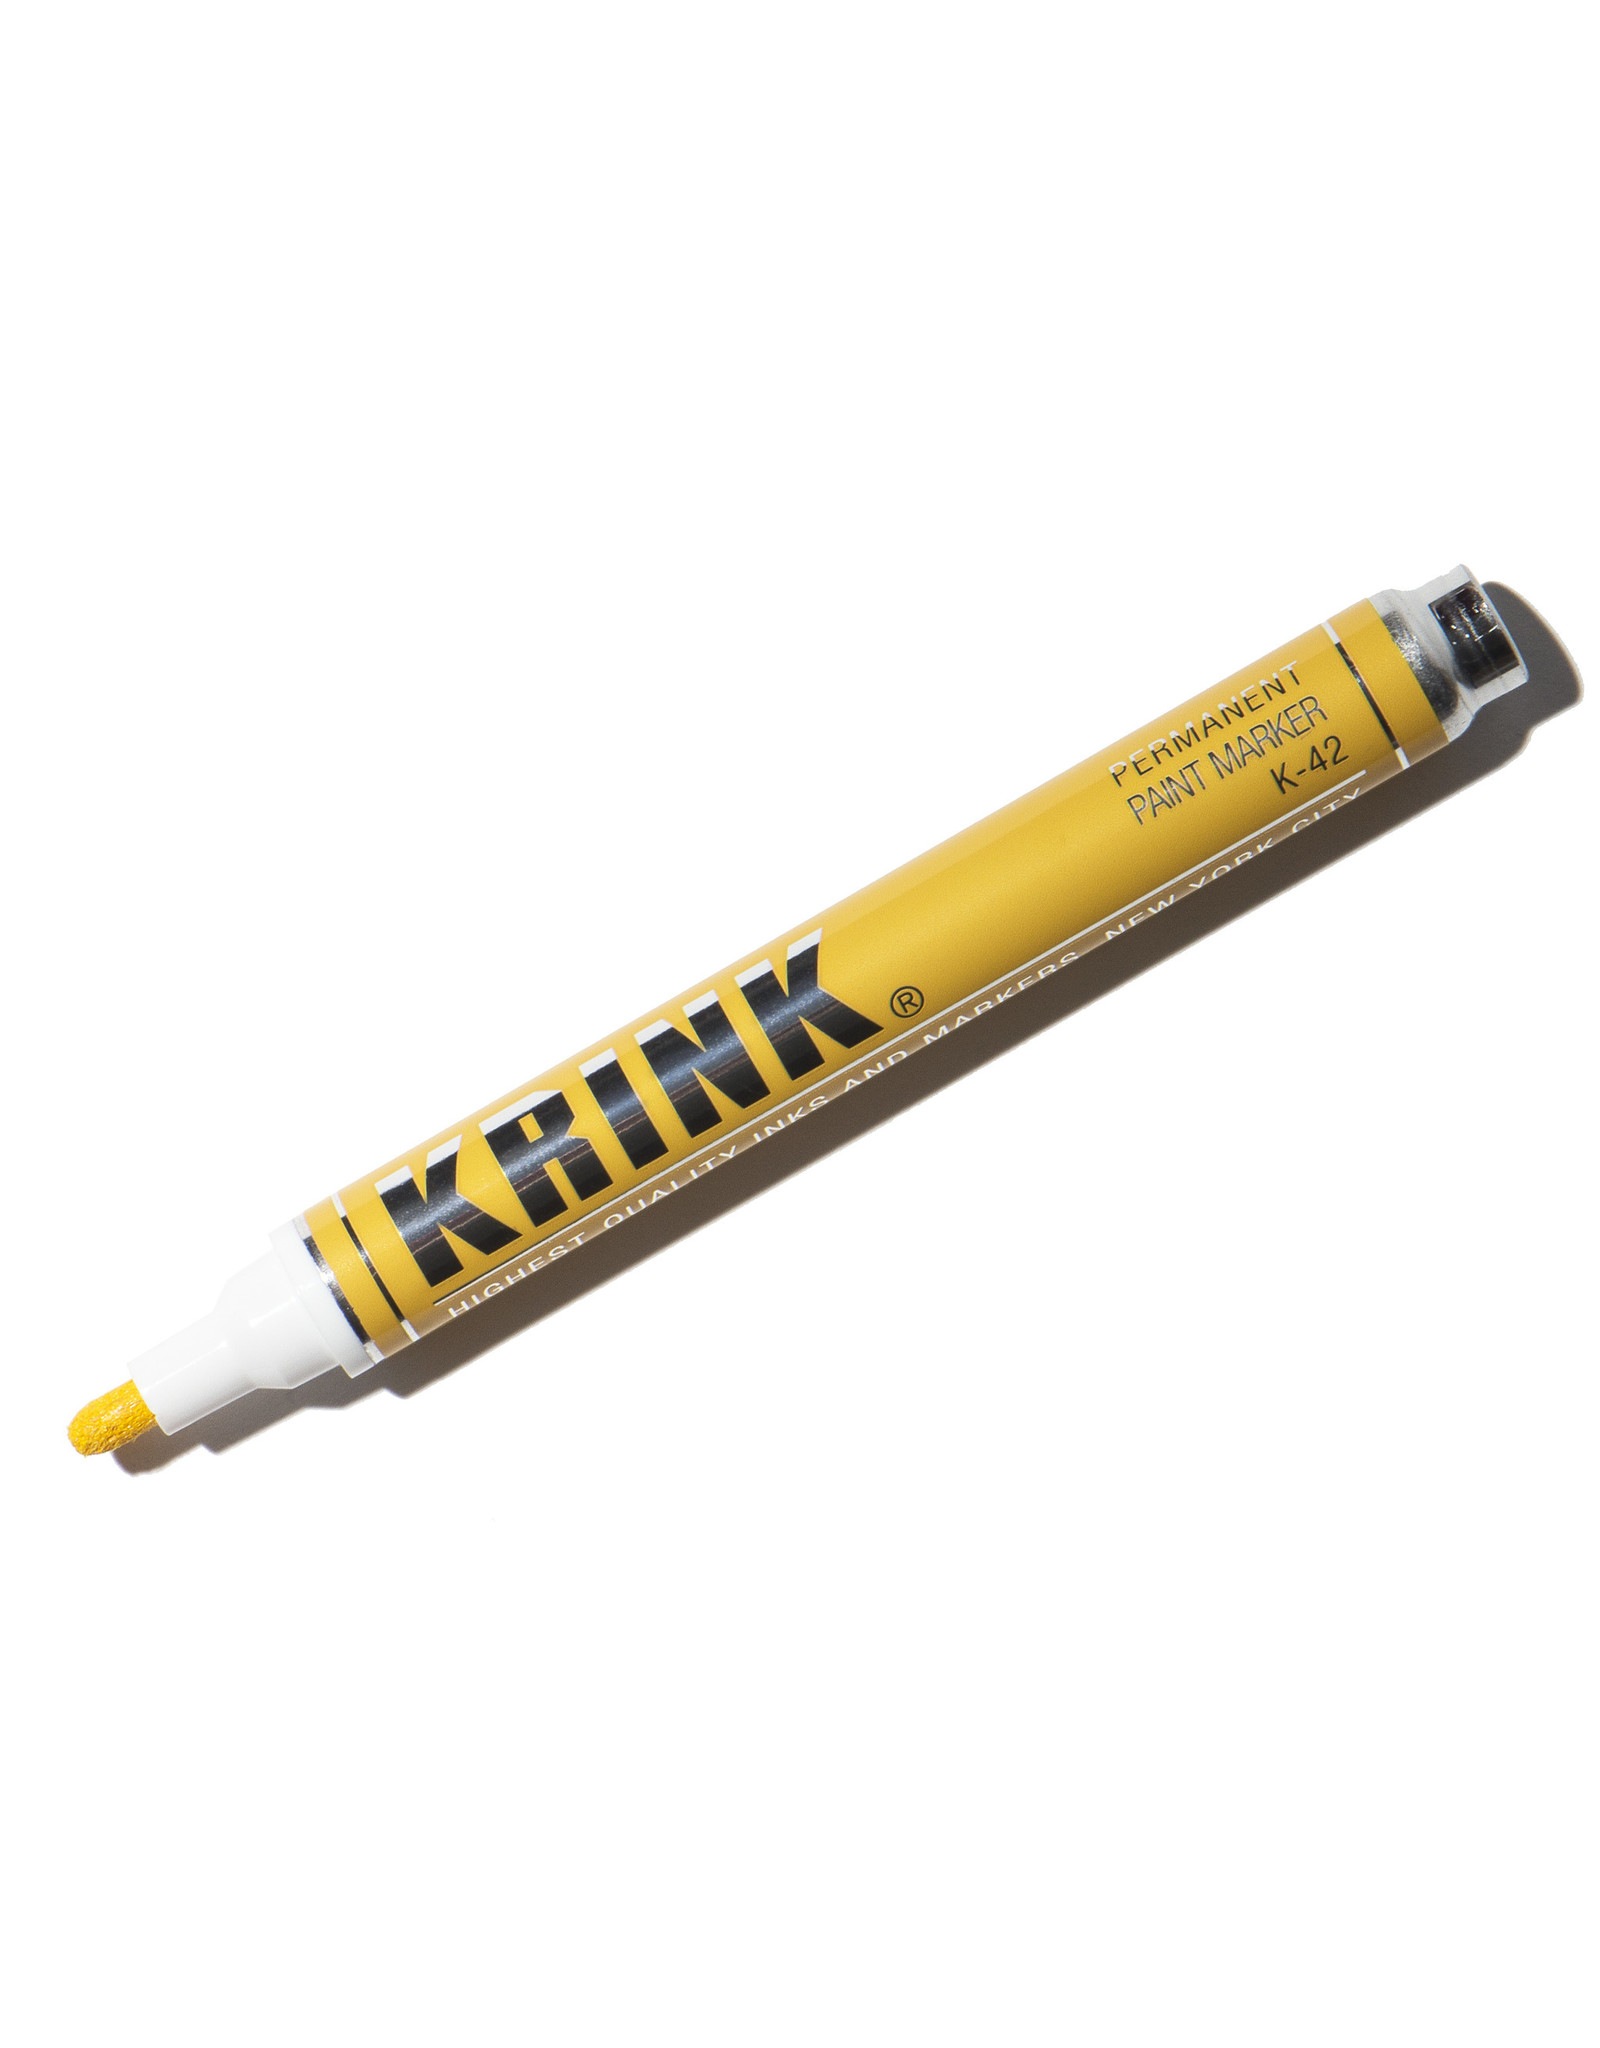 Krink Krink K-42 Alcohol Paint Marker, Yellow